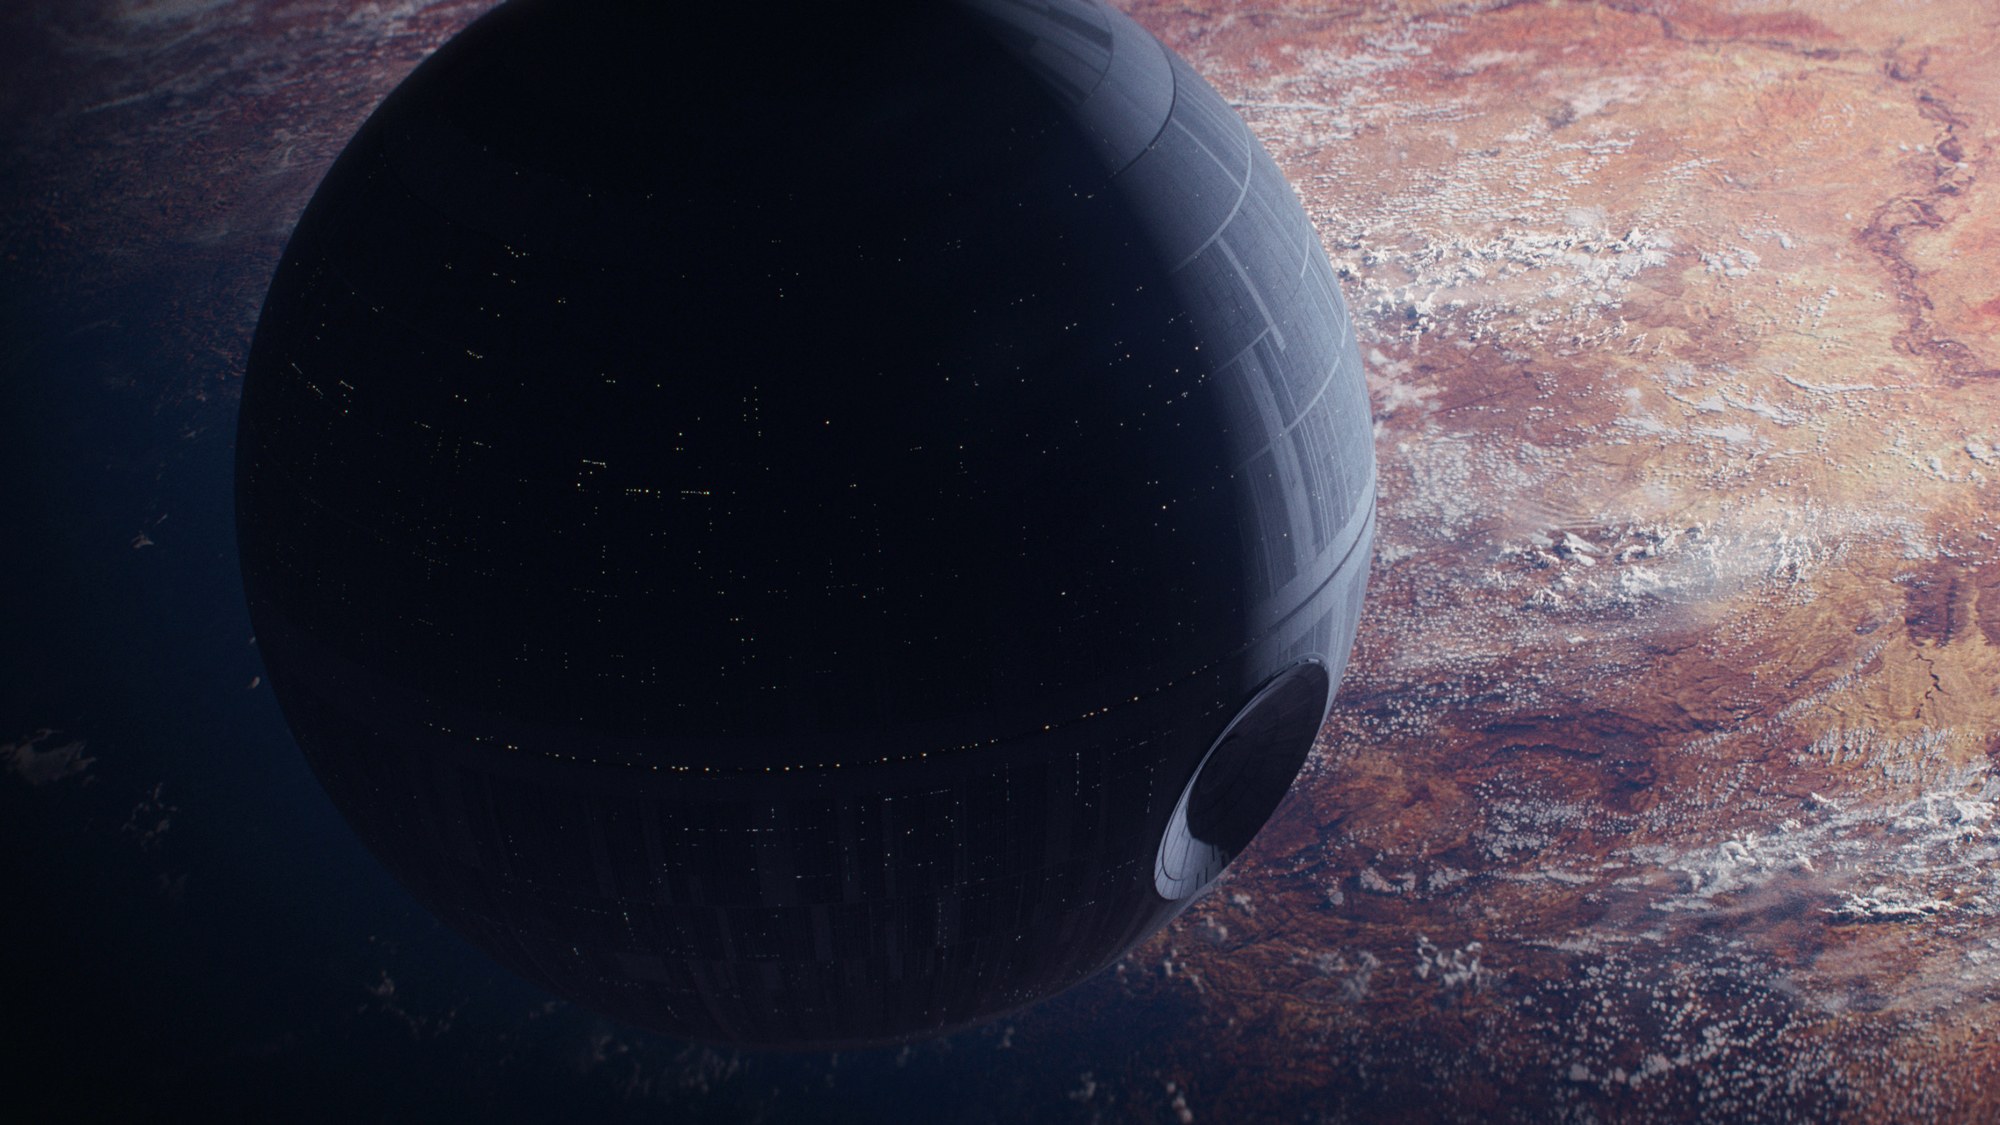 Whoa! Is That Death Star Wreckage on That Planet?